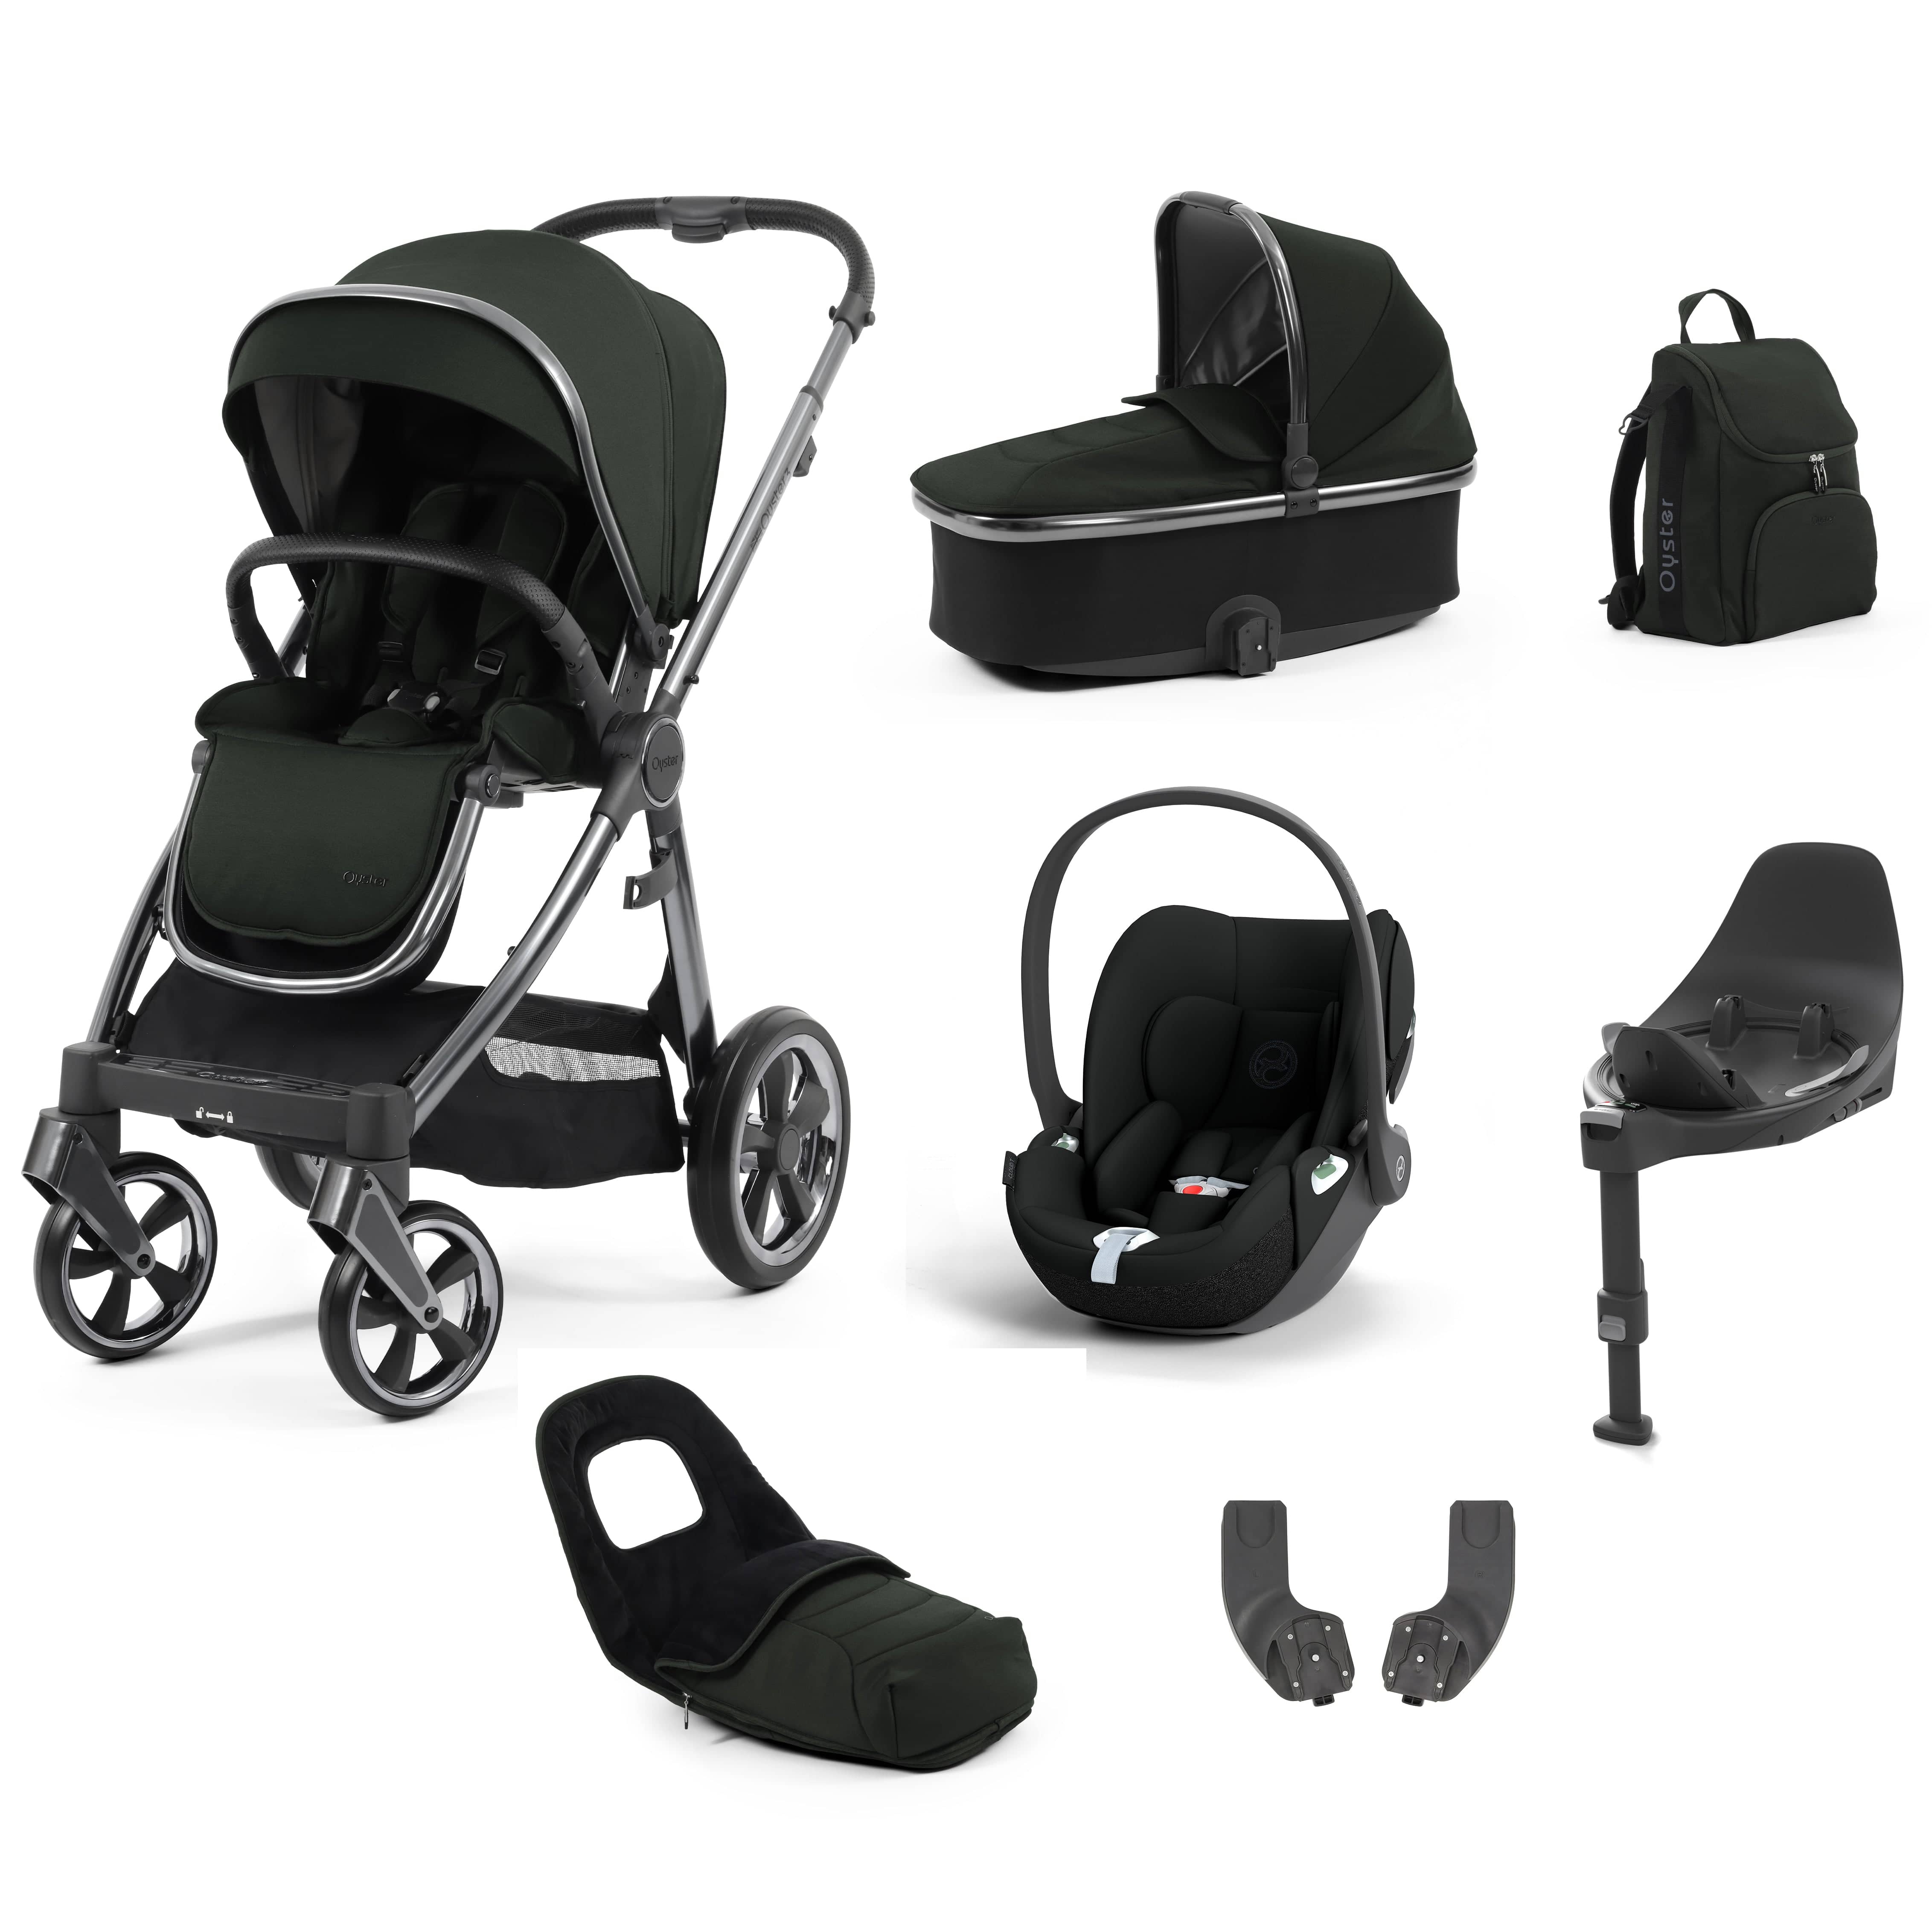 BabyStyle travel systems Babystyle Oyster 3 Luxury 7 Piece with Car Seat Bundle in Black Olive 14796-BLO